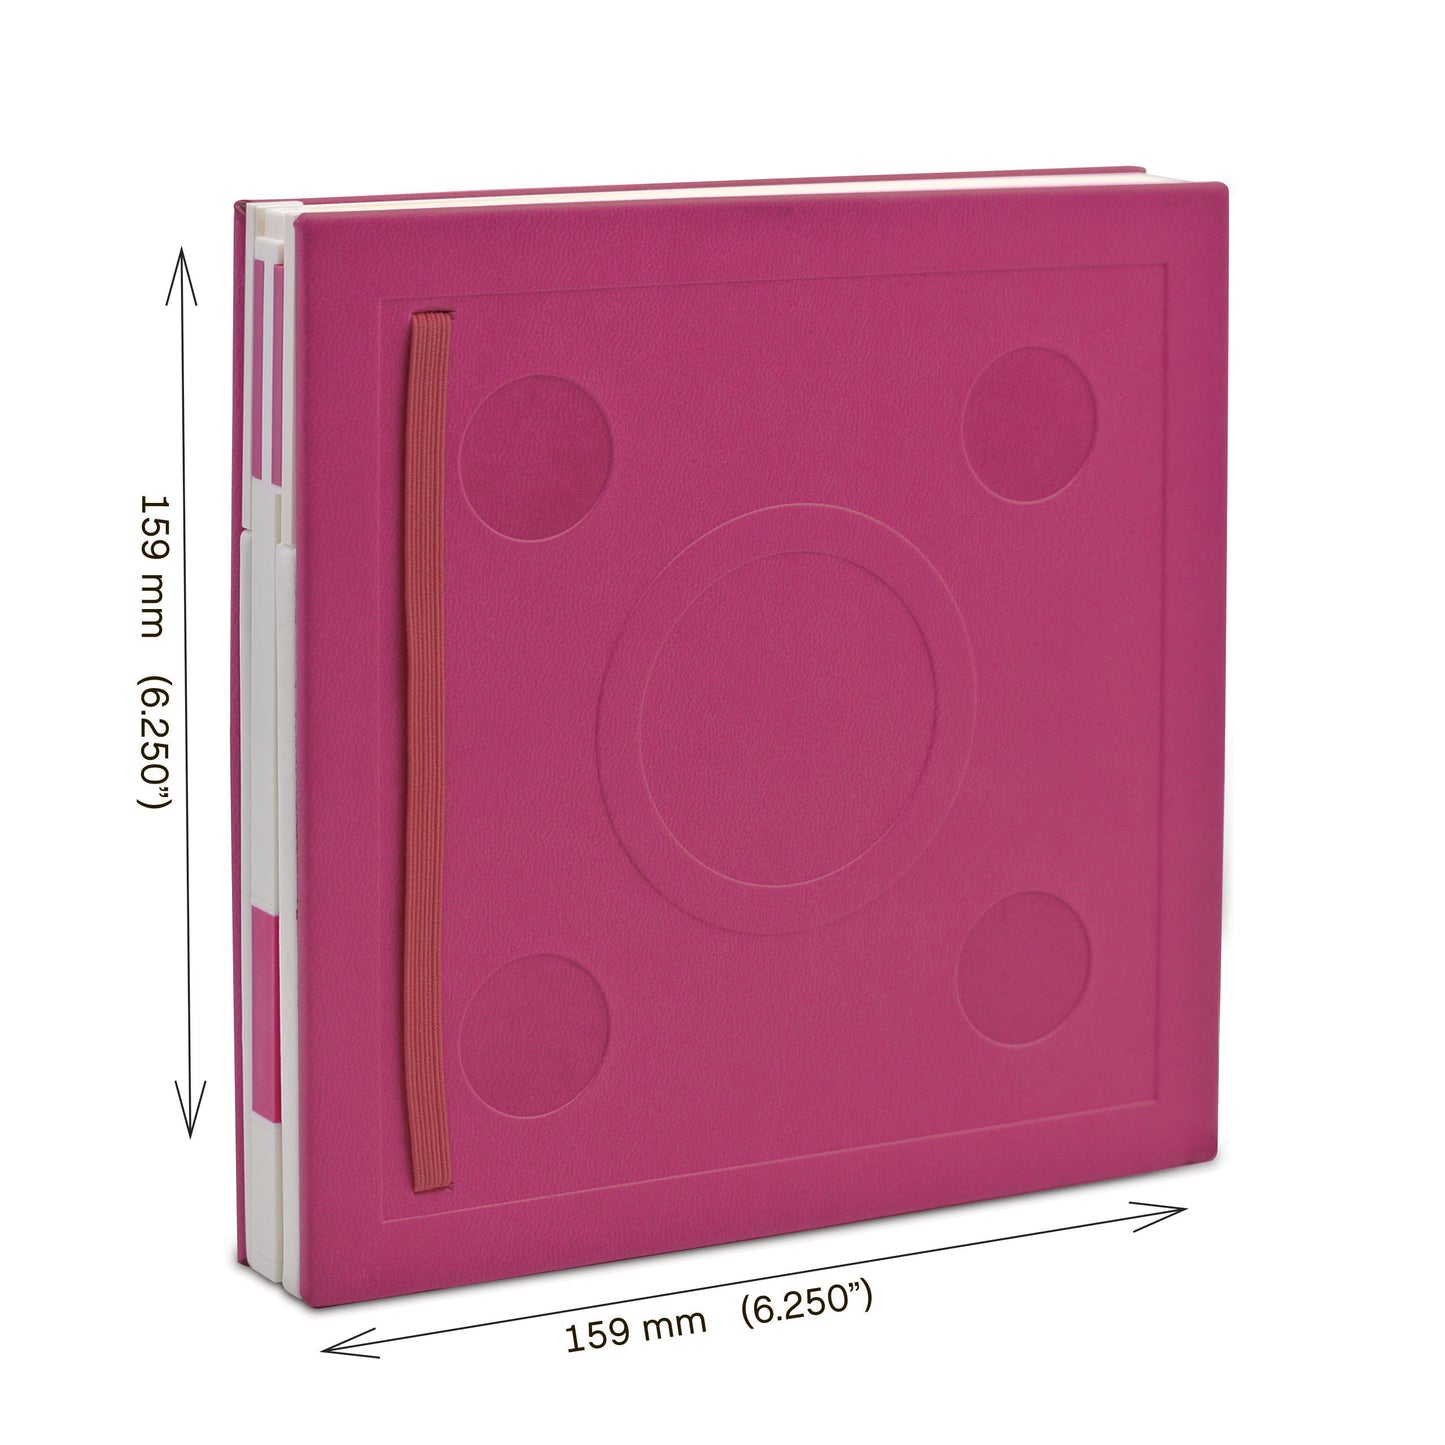 IQ LEGO® 2.0 Stationery Locking Notebook with Color-Matched Gel Pen - Violet (52438)